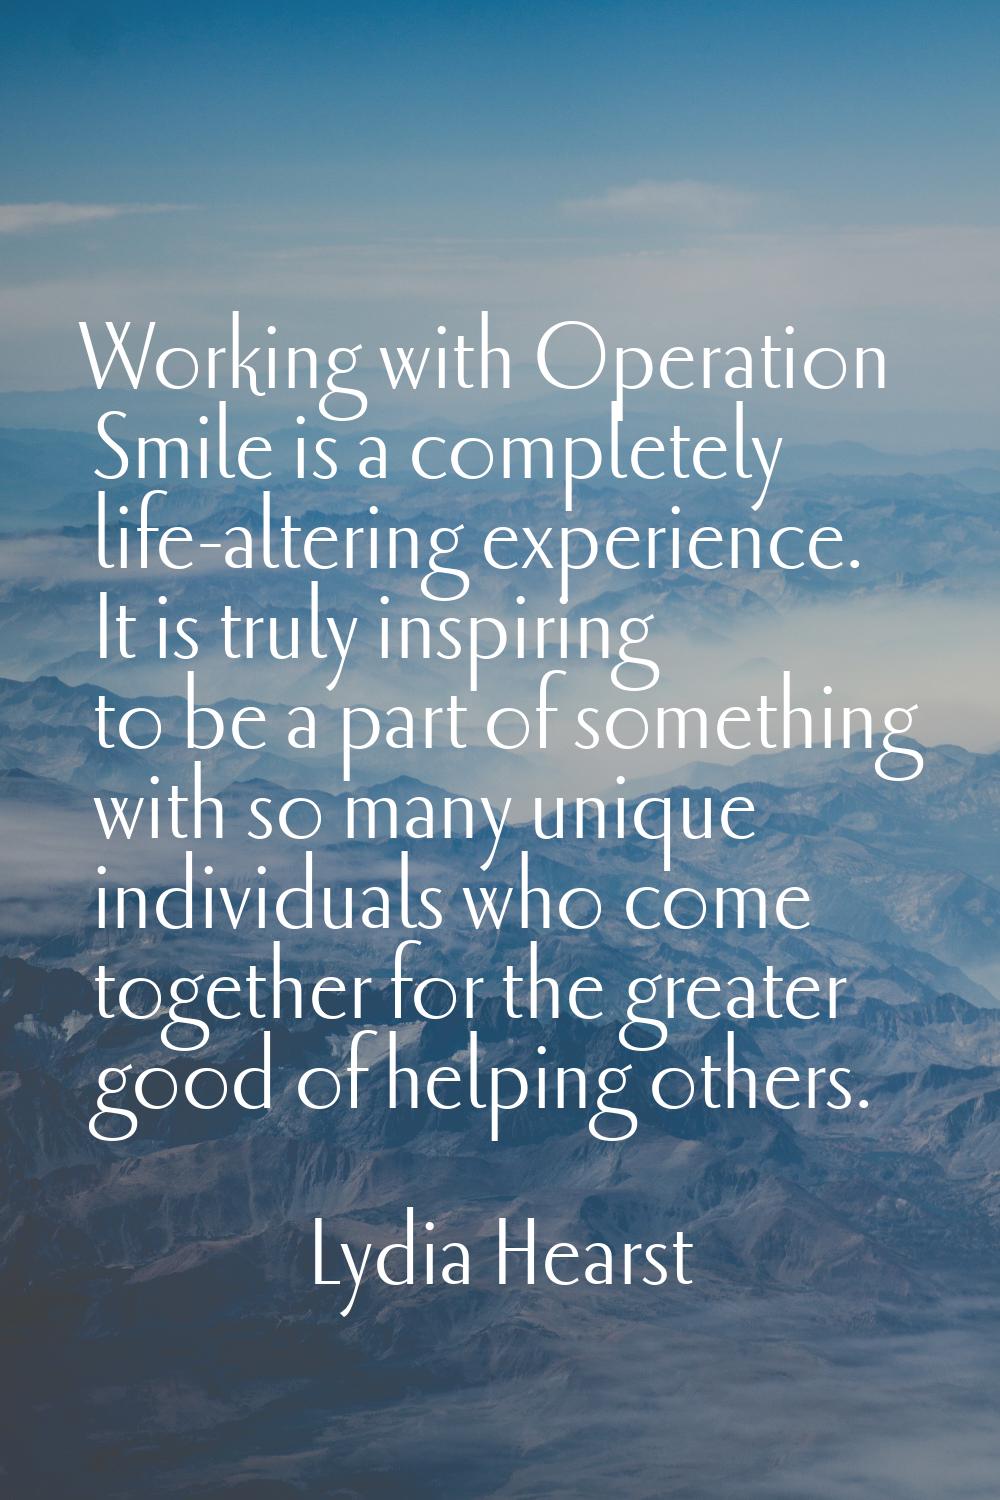 Working with Operation Smile is a completely life-altering experience. It is truly inspiring to be 